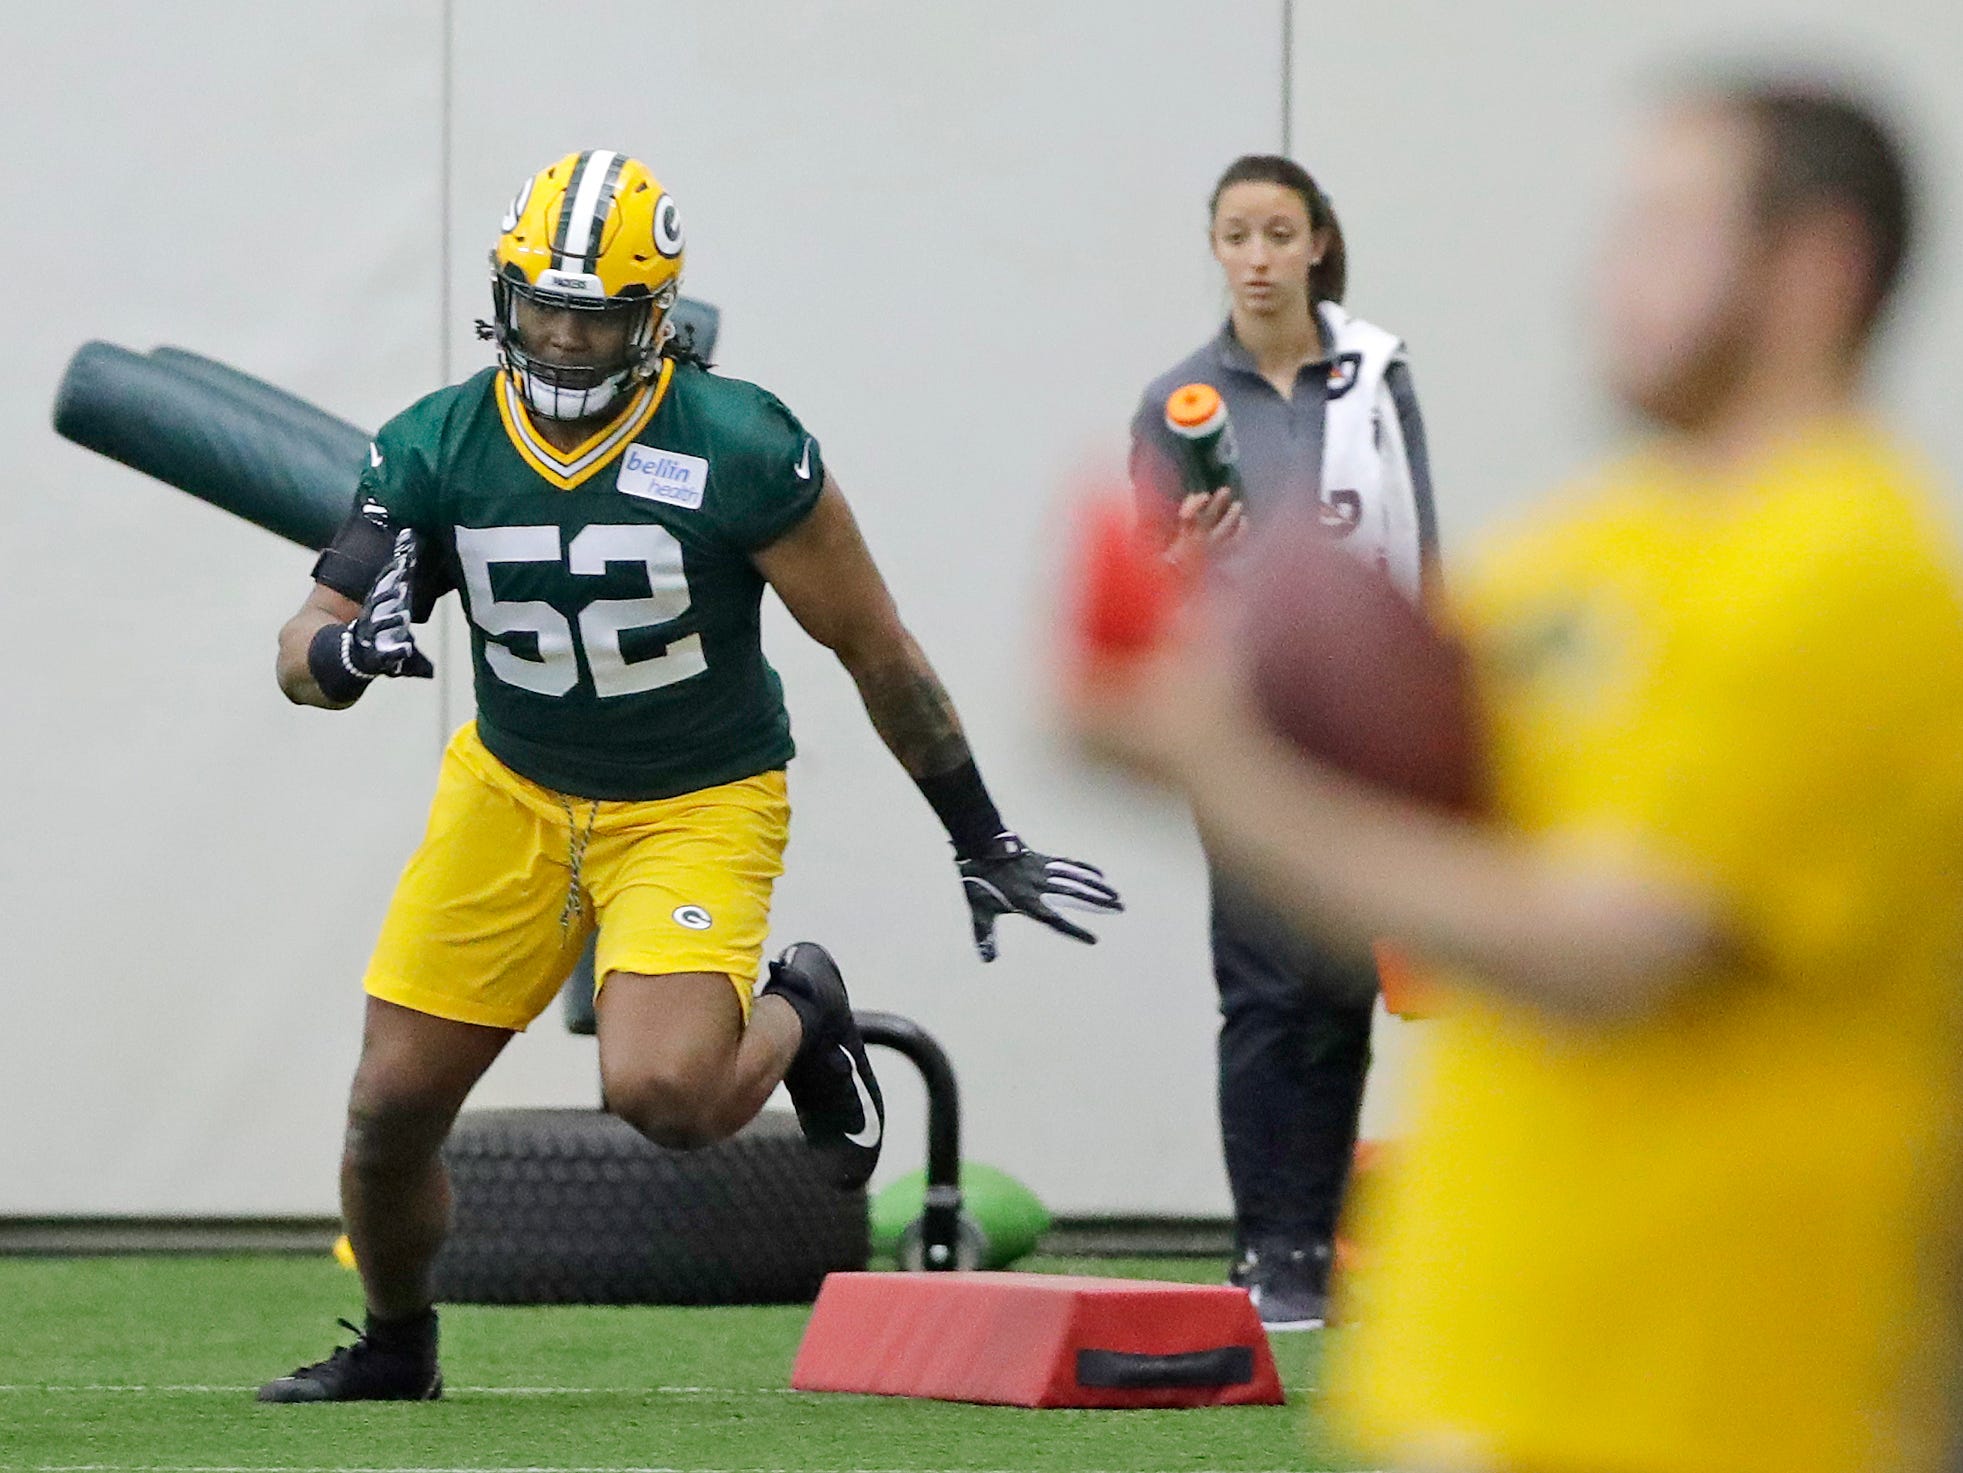 Green Bay Packers linebacker Rashan Gary (52) during practice at rookie minicamp at the Don Hutson Center on Friday, May 3, 2019 in Ashwaubenon, Wis.
Adam Wesley/USA TODAY NETWORK-Wis